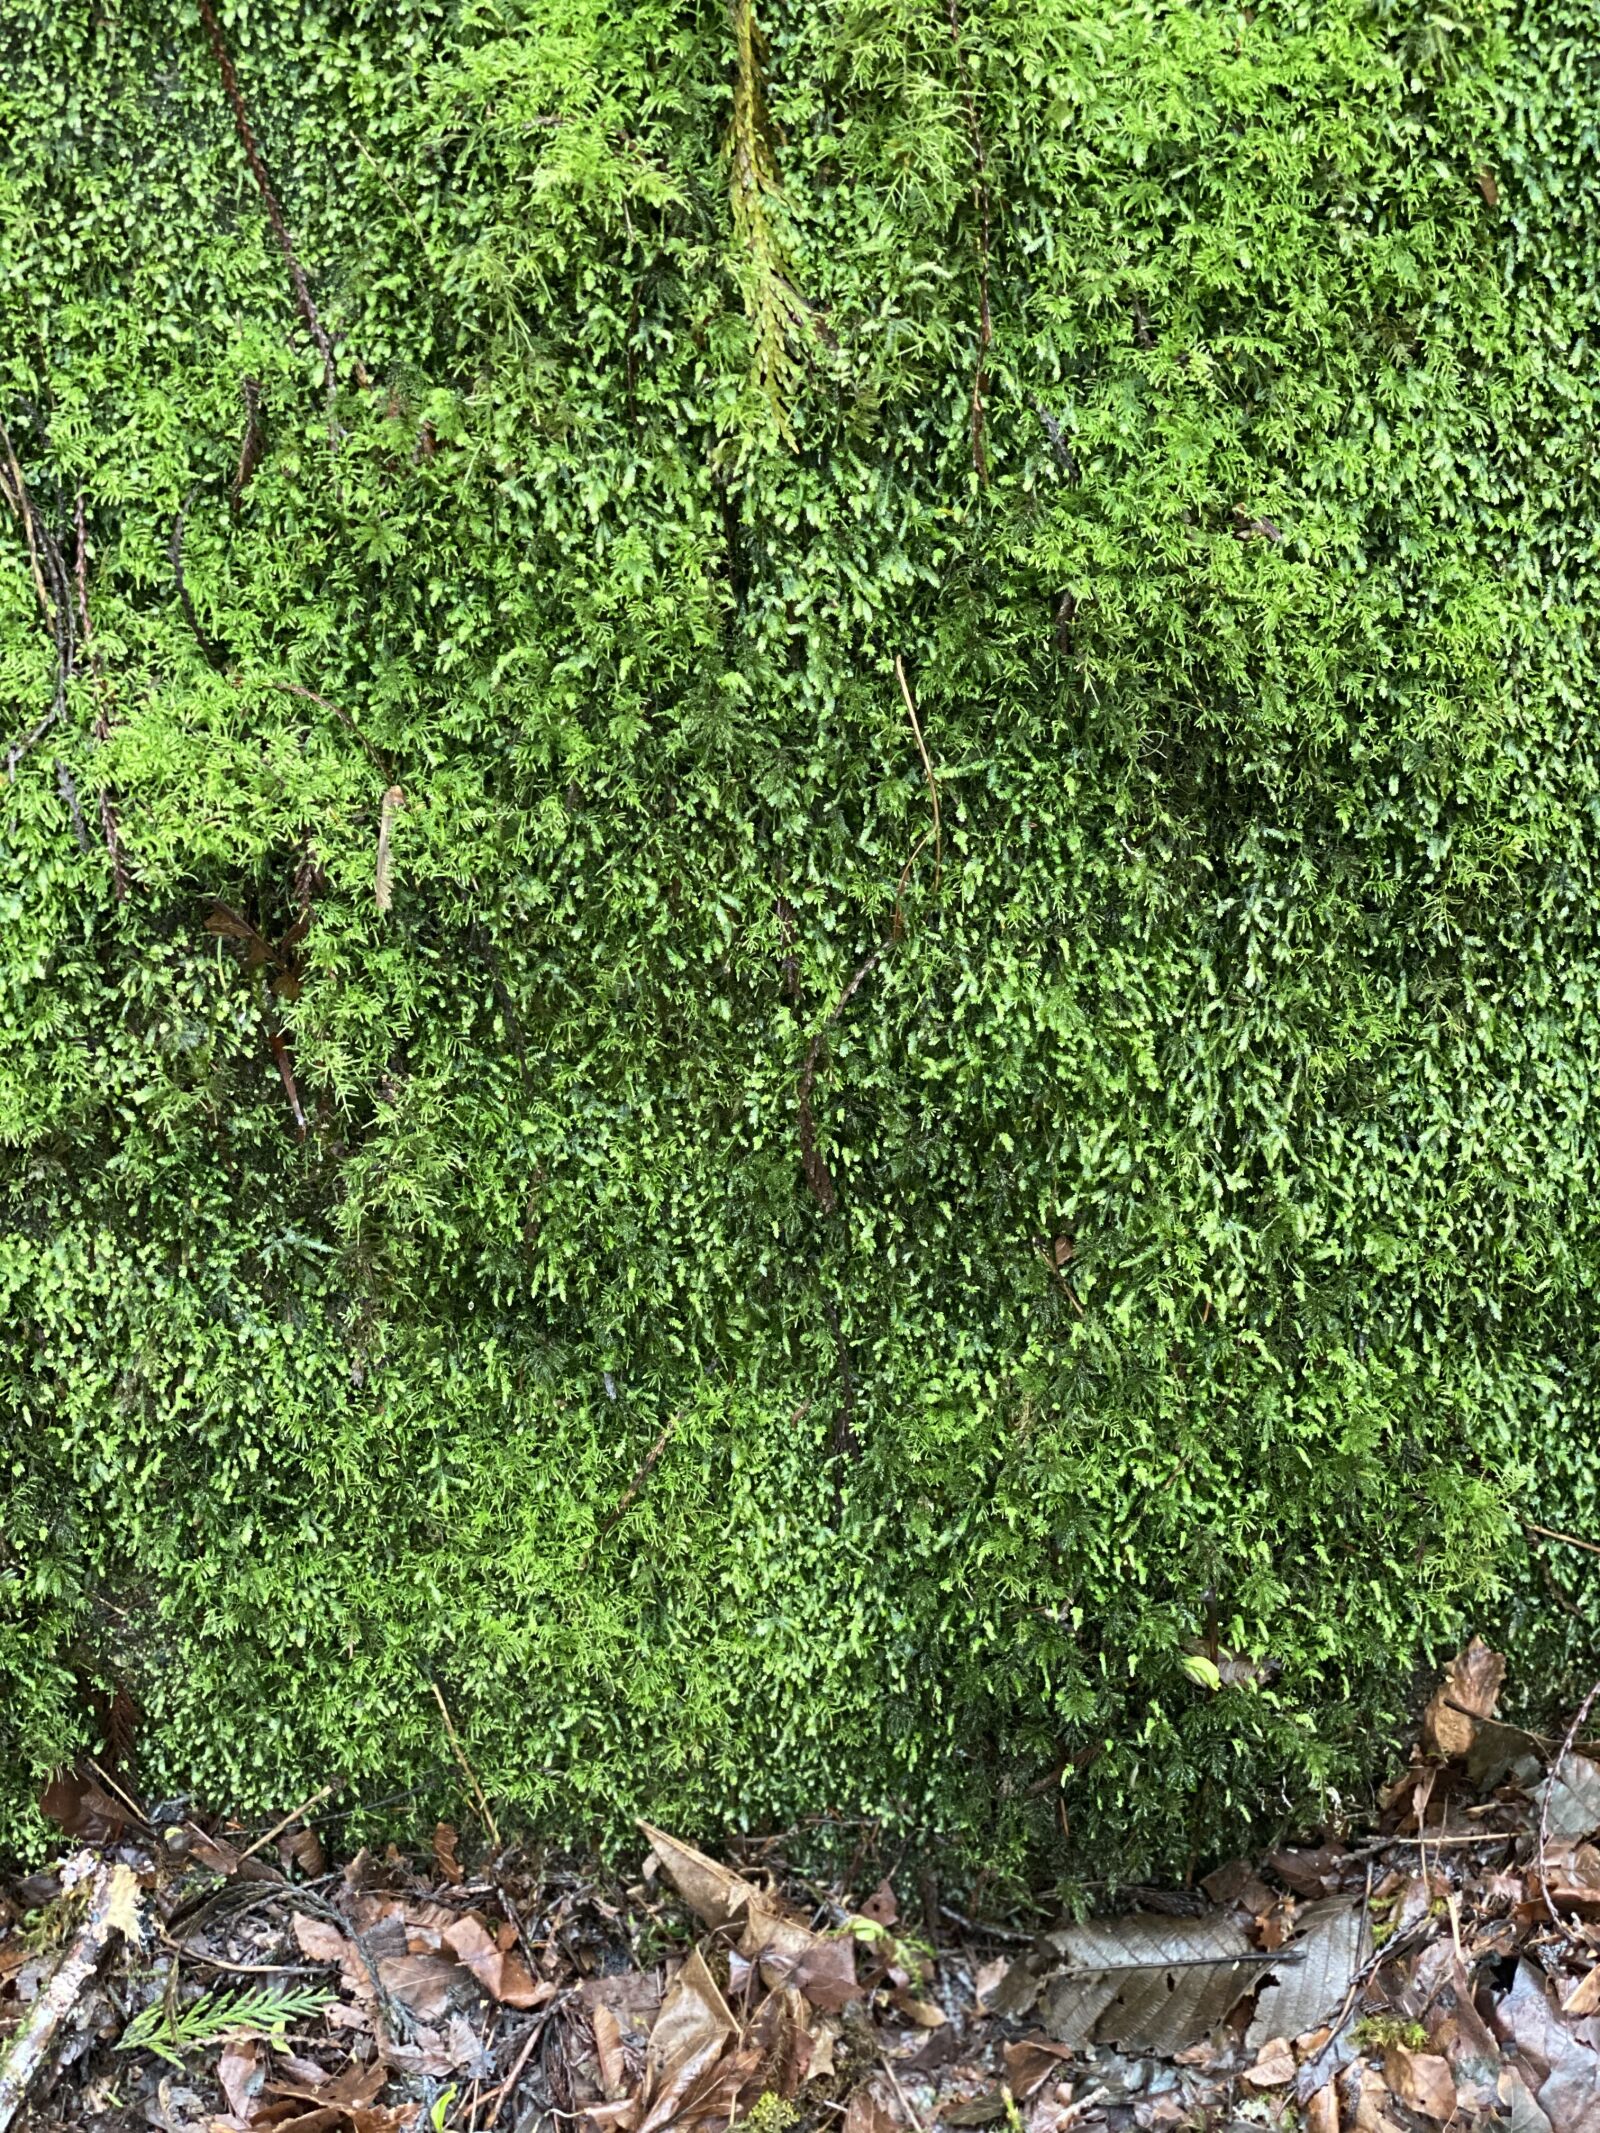 Apple iPhone 11 Pro Max + iPhone 11 Pro Max back dual camera 6mm f/2 sample photo. Moss, green, nature photography